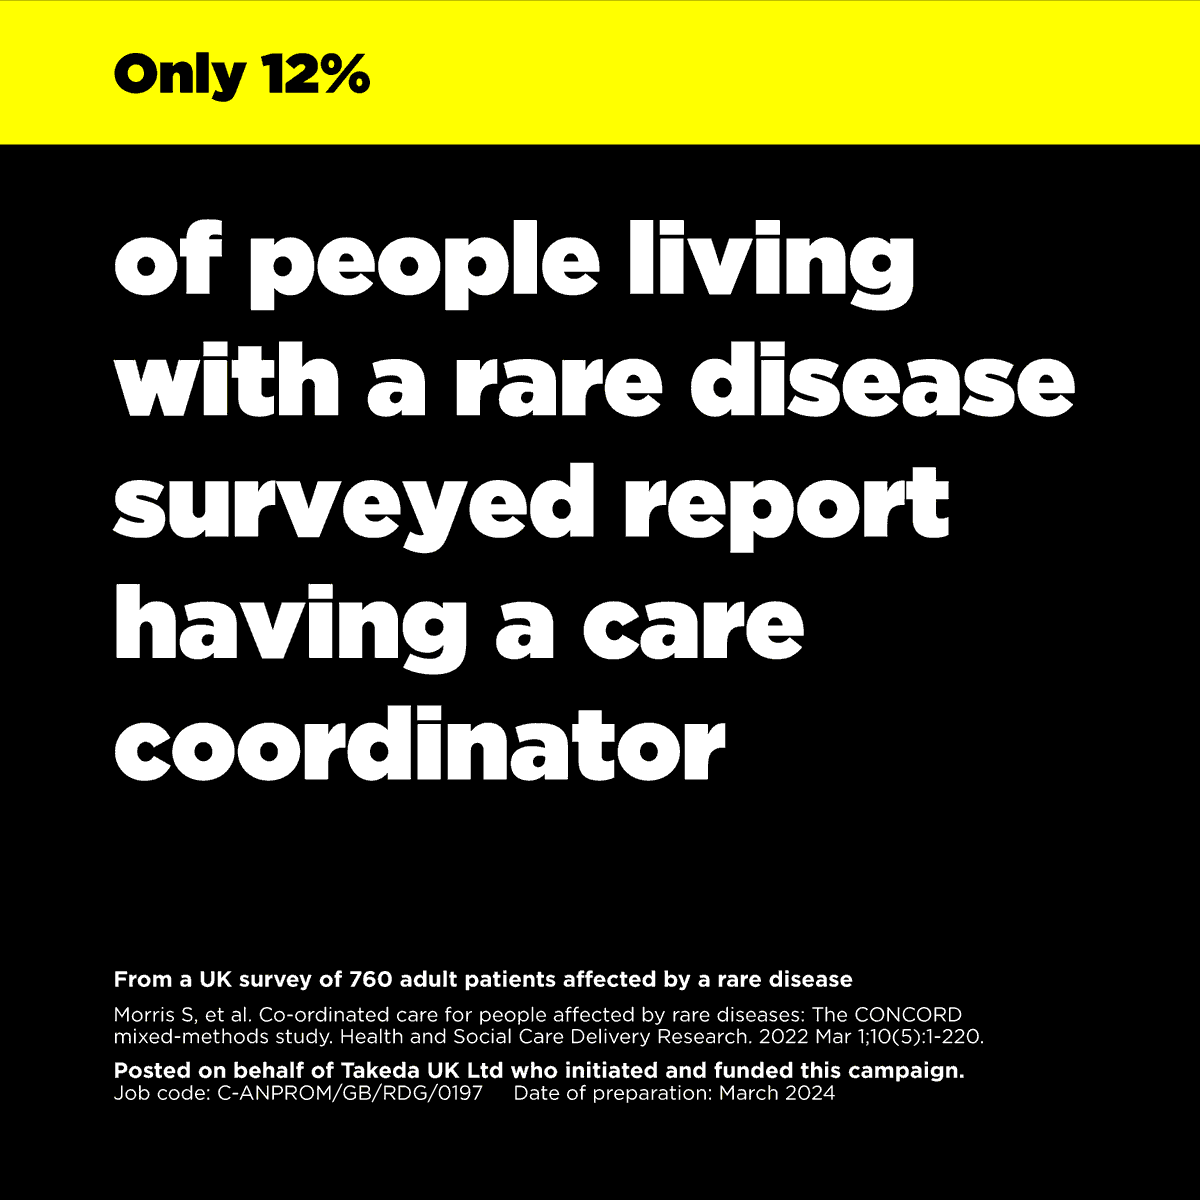 People living with #RareDisease must often manage their own care. The burden of care coordination can create pressures across the lives of patients, their families and carers. Help us #ElevateCareForRare #IAmNumber17 Check out iamnumber17.org.uk cc @PAVS_HealthWB